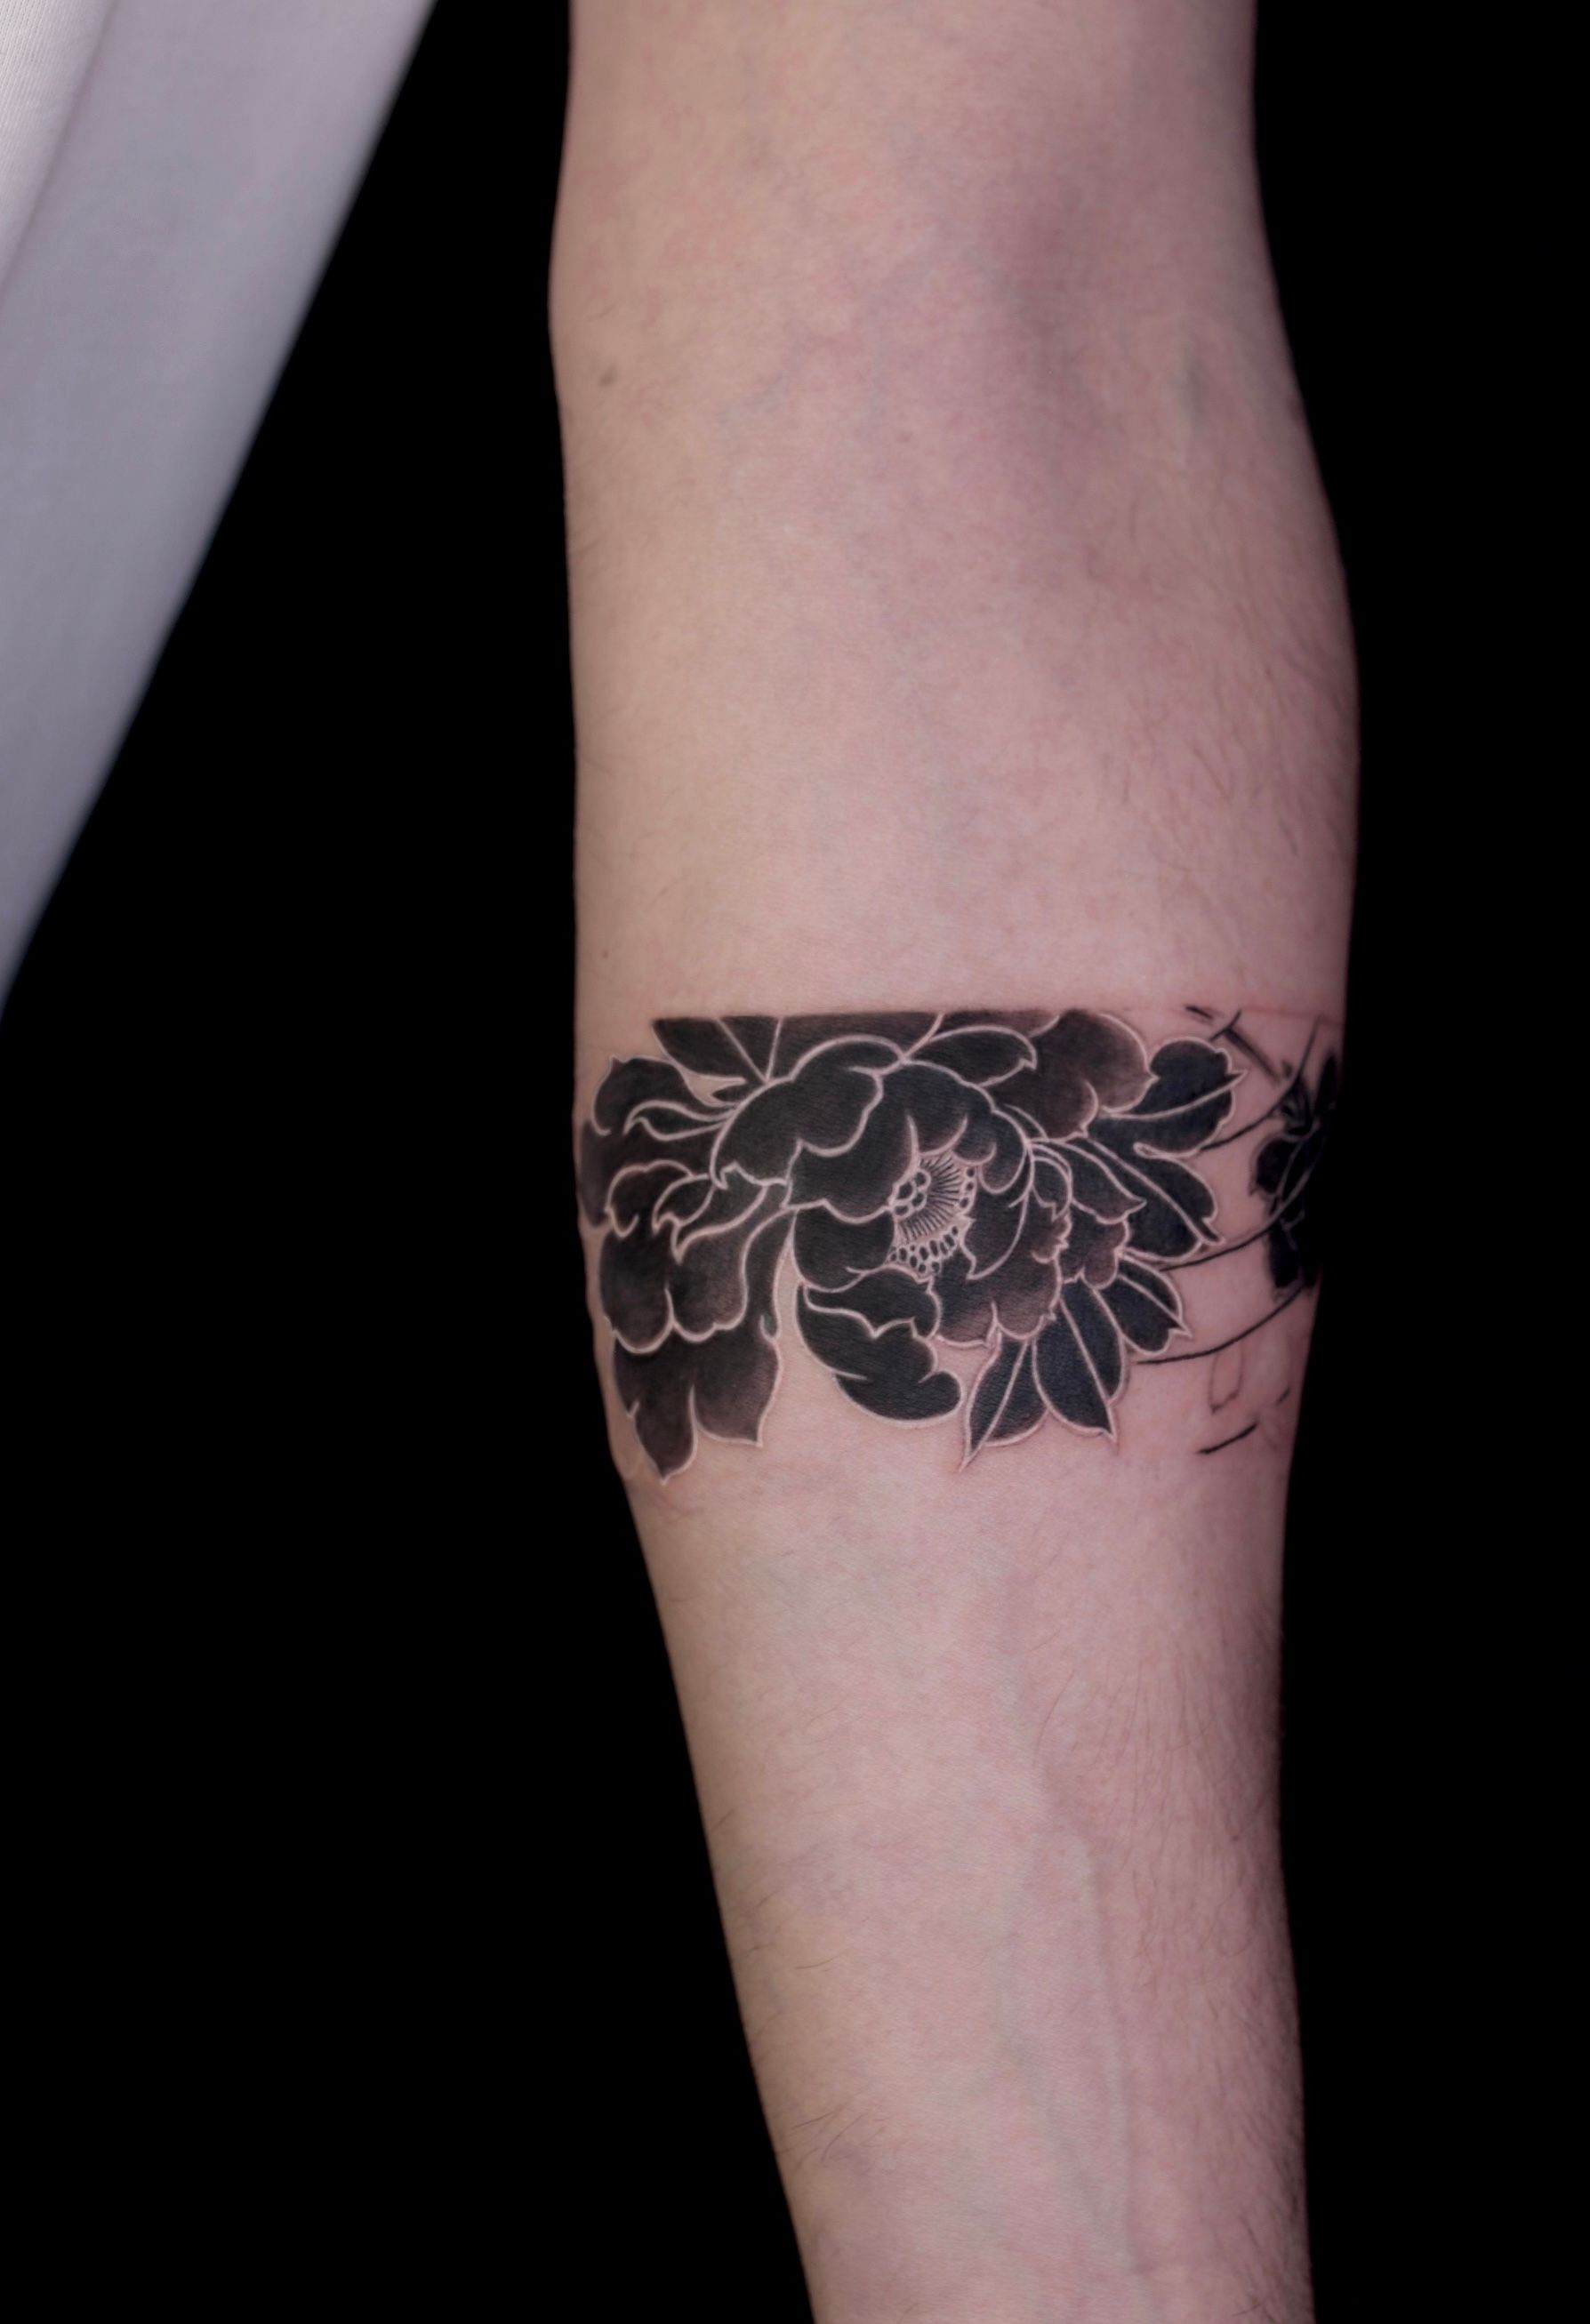 Do you think flower tattoos look good on men? I like big flower tattoos  with thin lines that are typically on hips/ribs. How would this style look?  : r/TattooDesigns